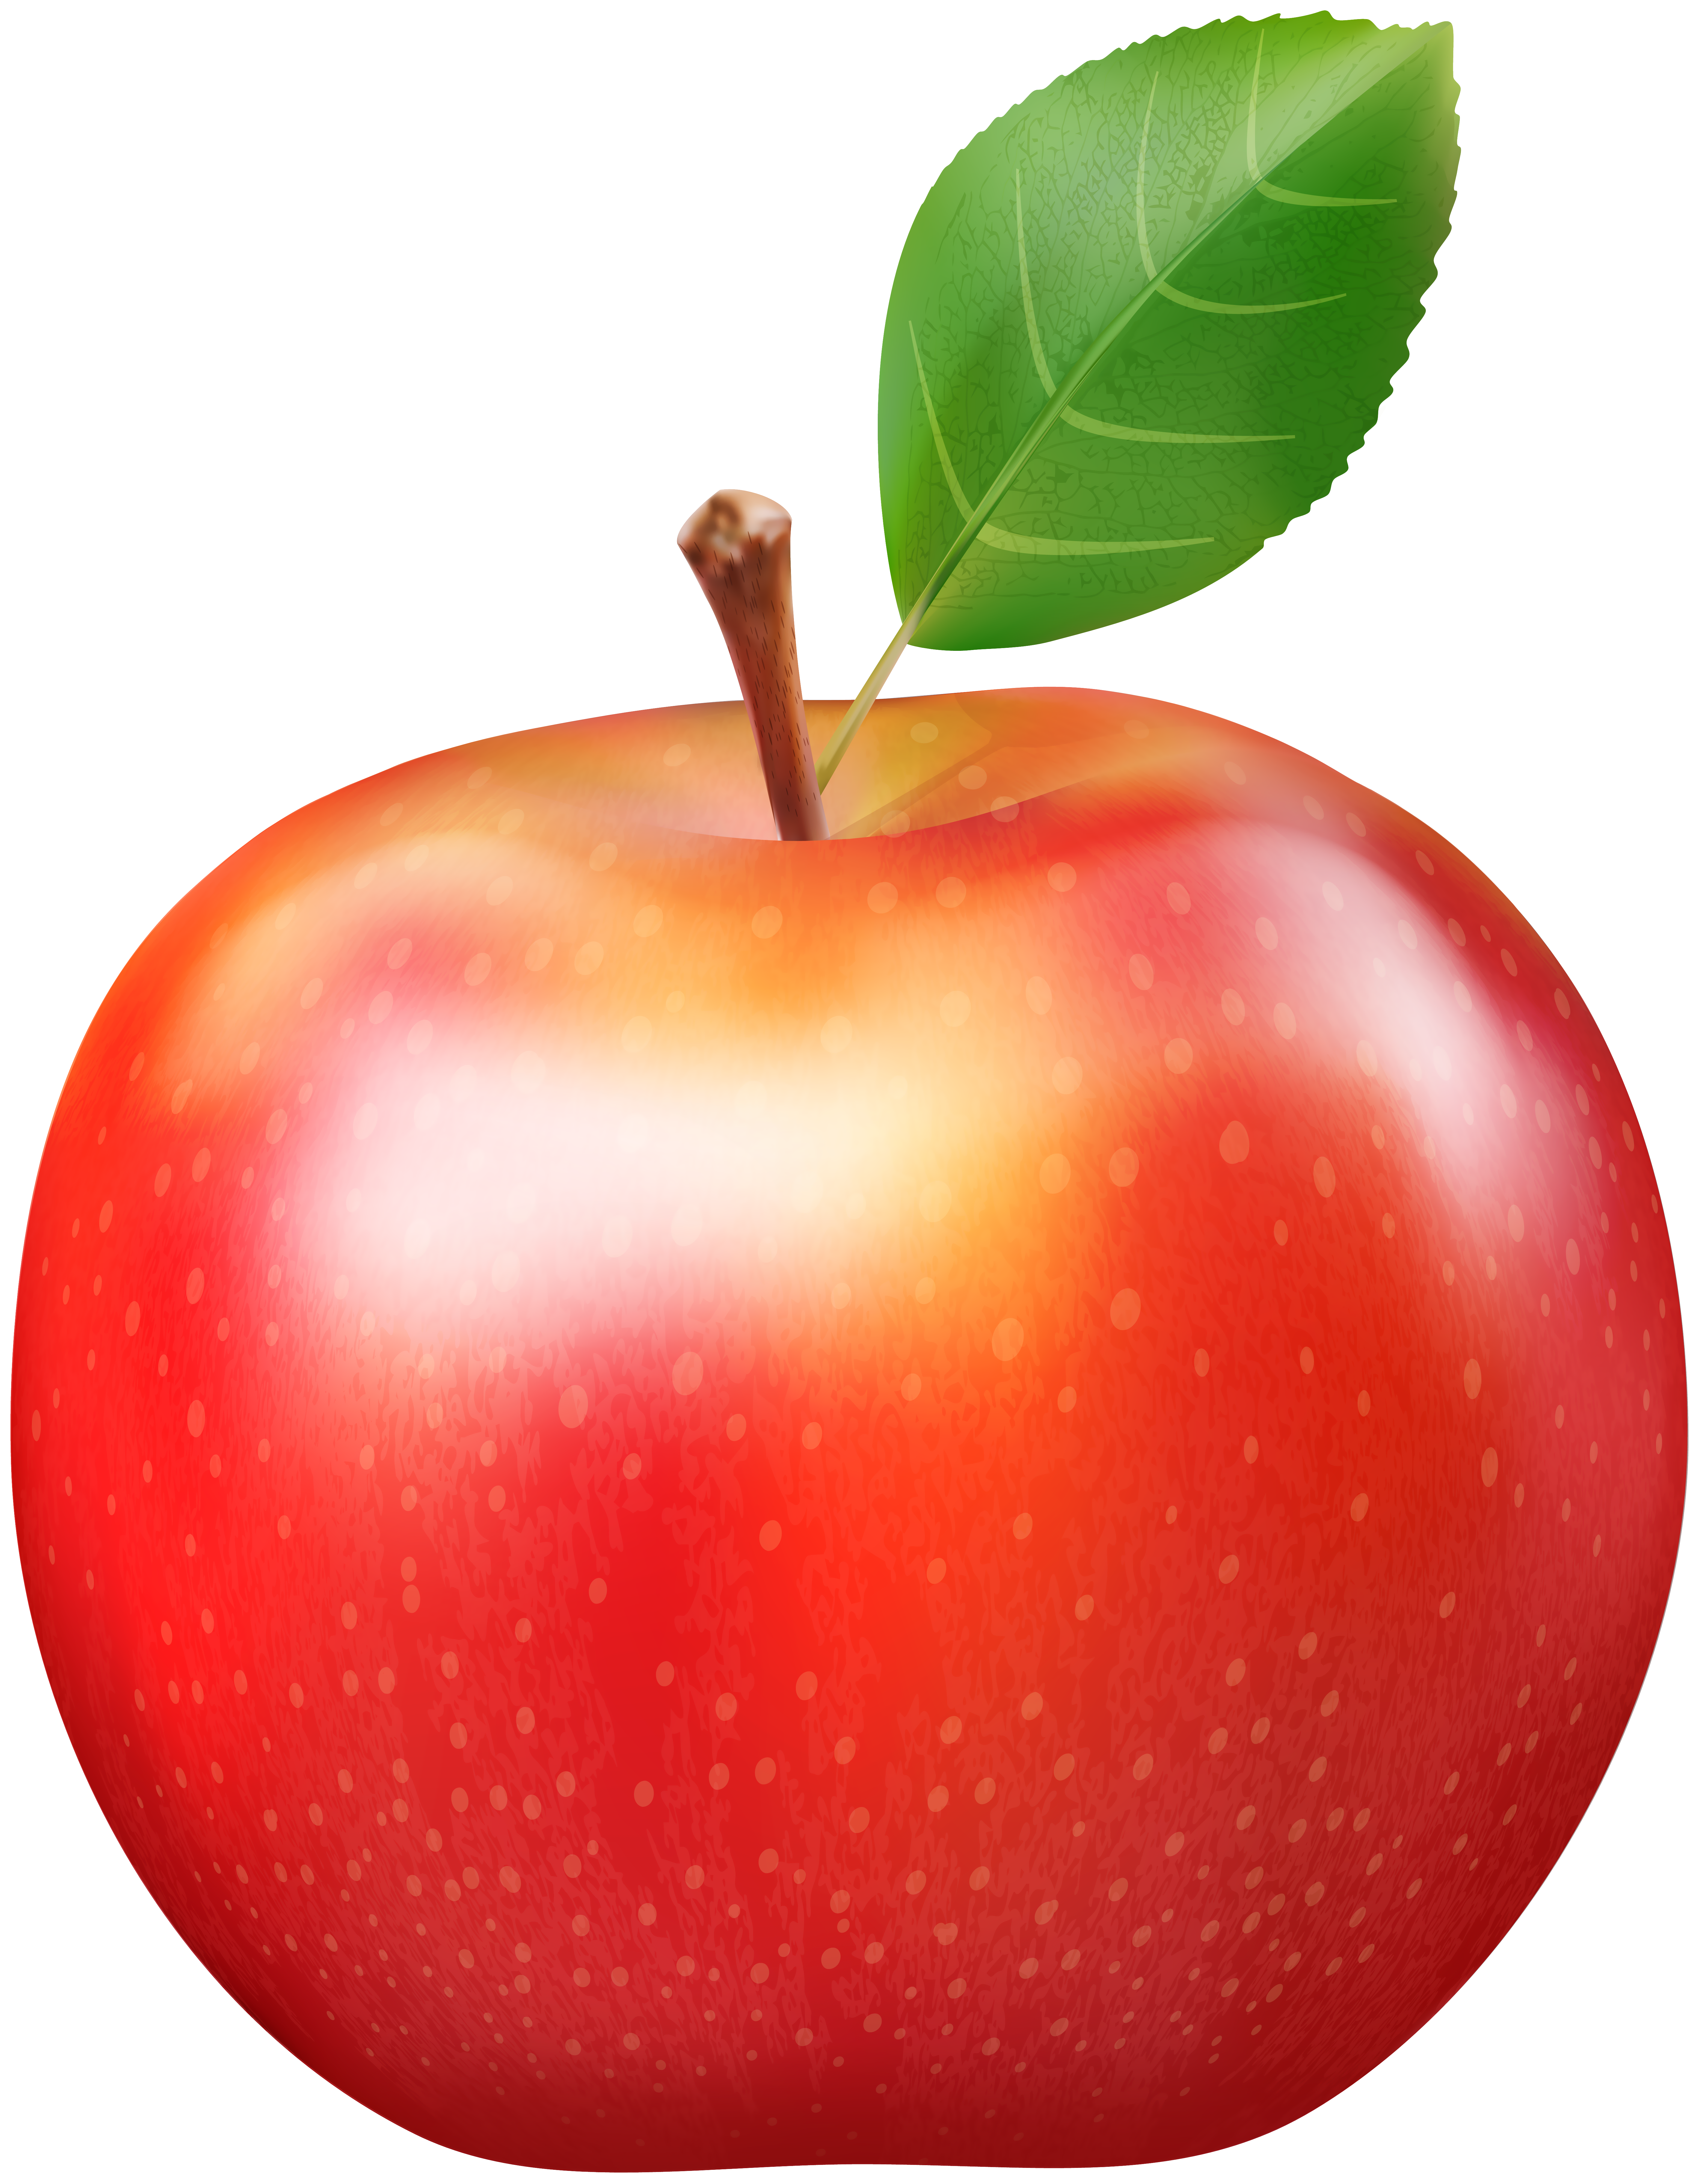 fresh-red-apple-png-clip-art-image-gallery-yopriceville-high-quality-free-images-and